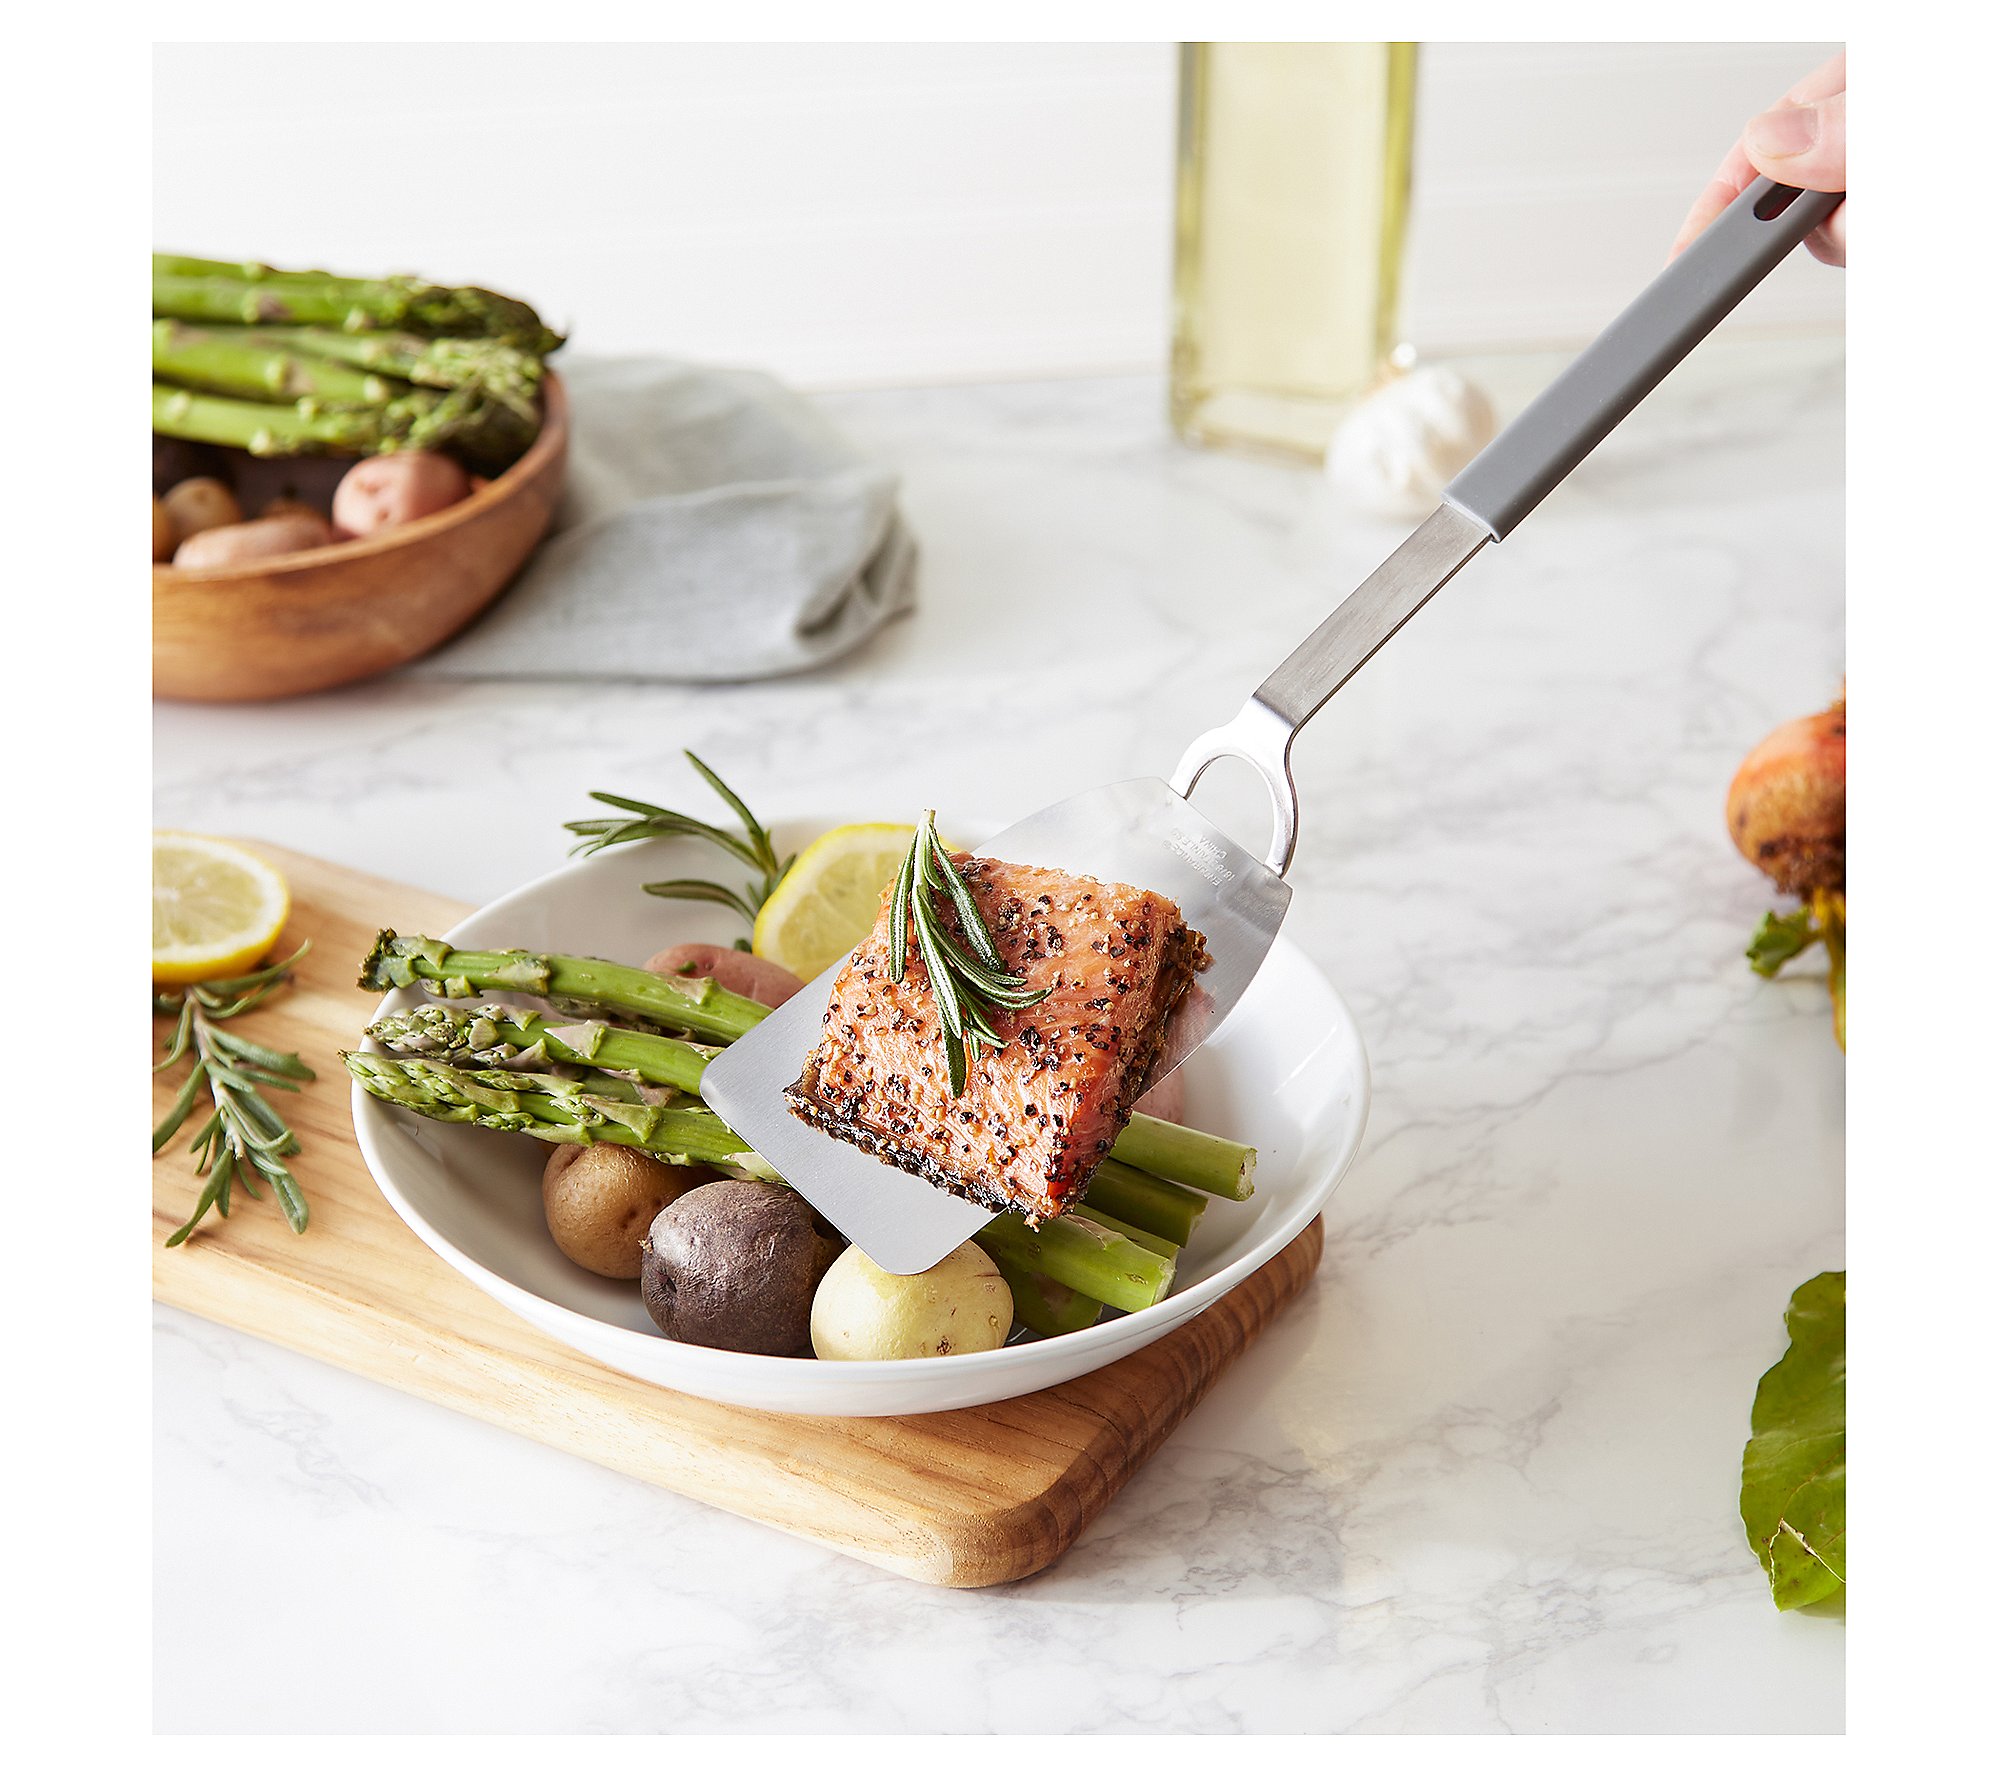 RSVP Stainless Steel Flexible Spatula